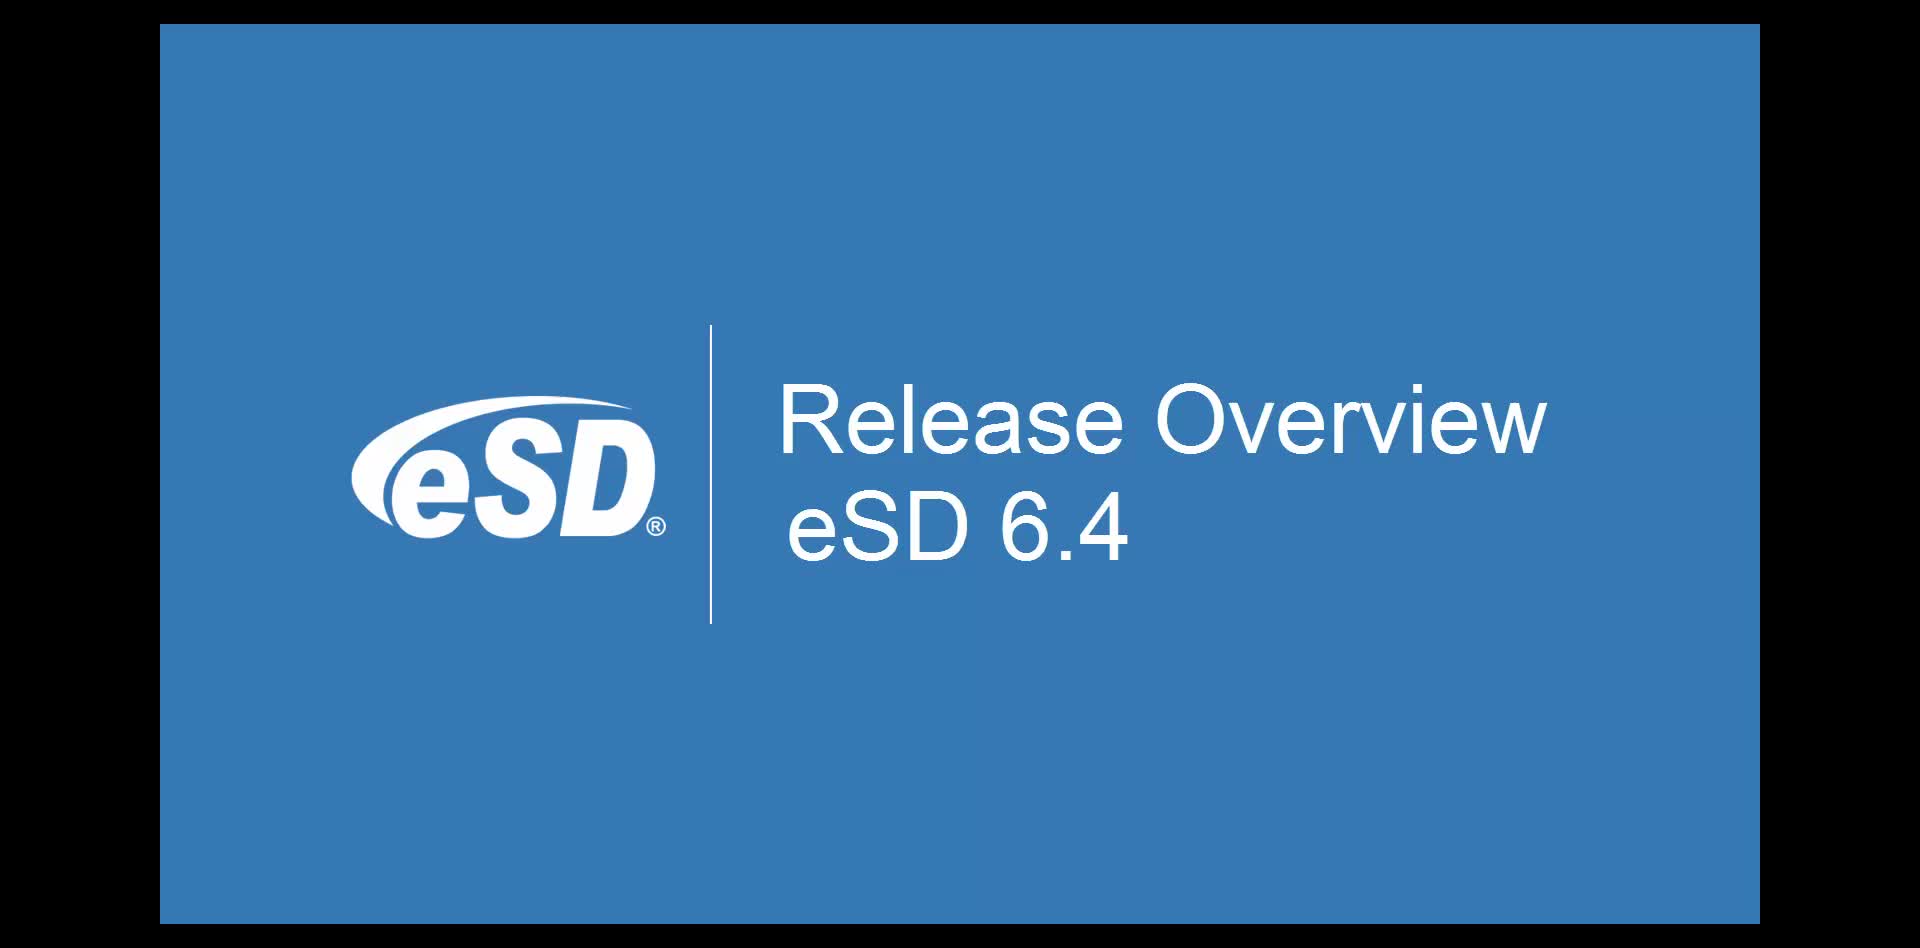 eSD 6.4 Release Overview